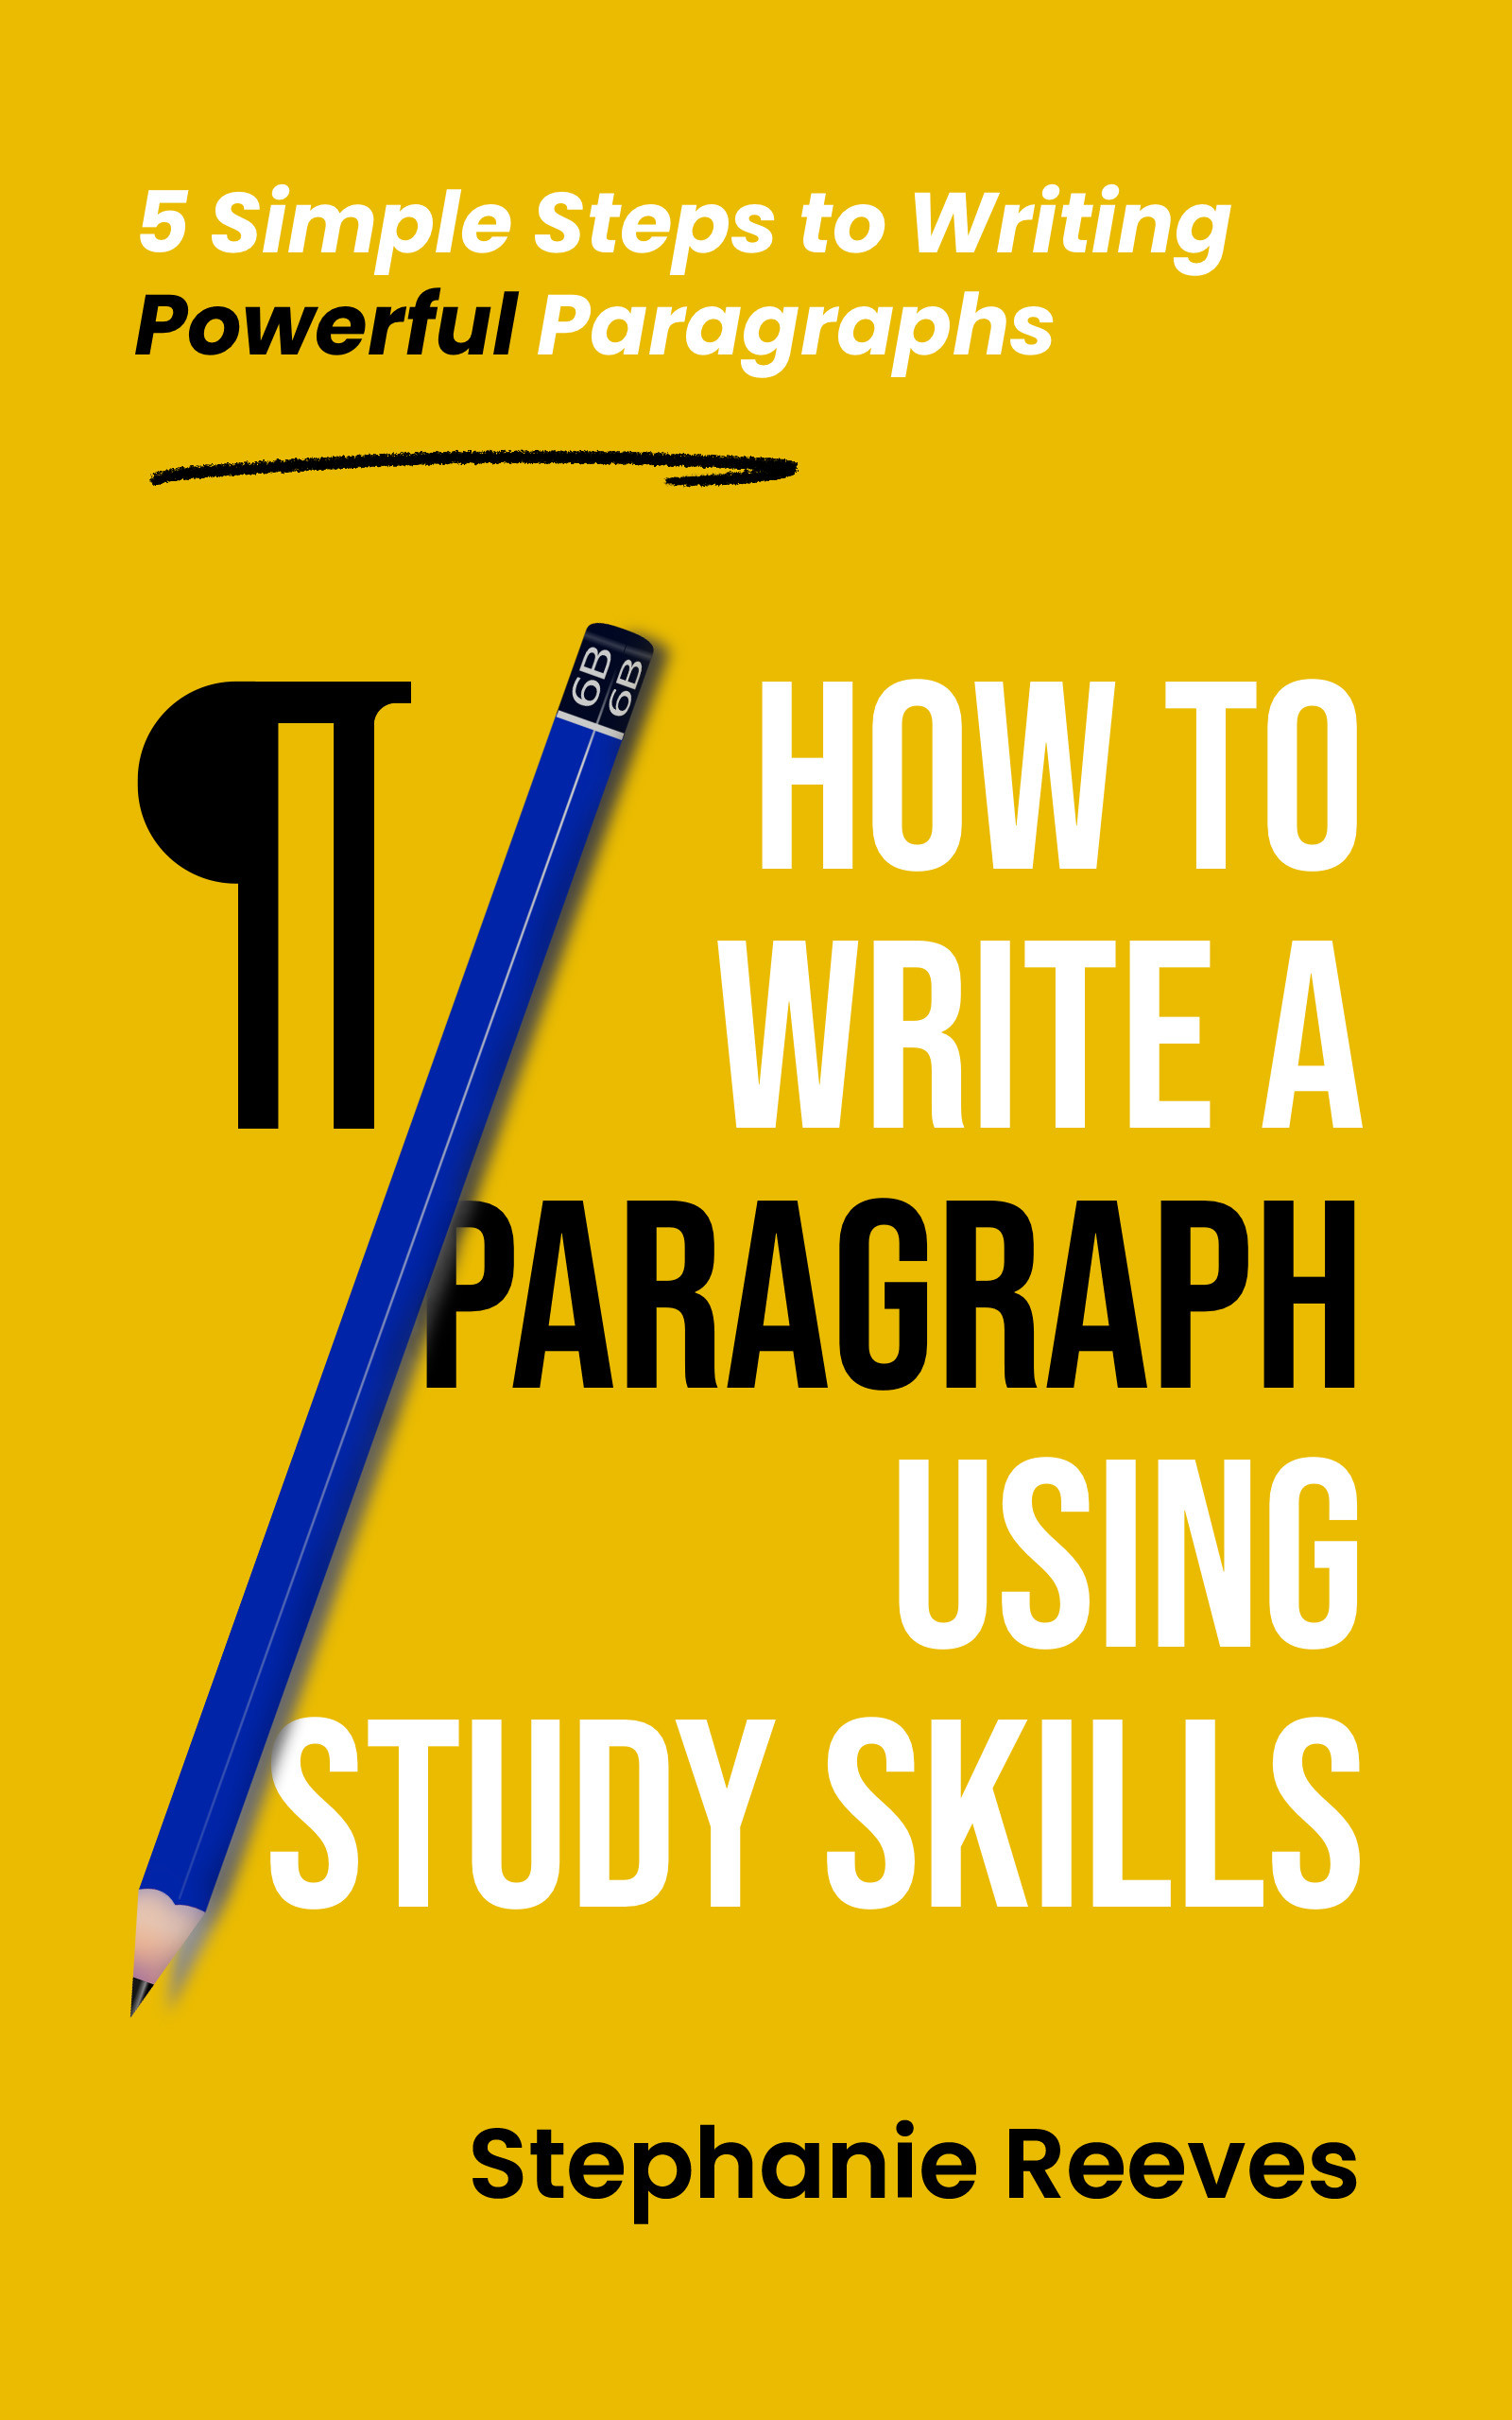 How to Write a Paragraph using Study Skills: 5 Simple Steps to Writing Powerful Paragraphs